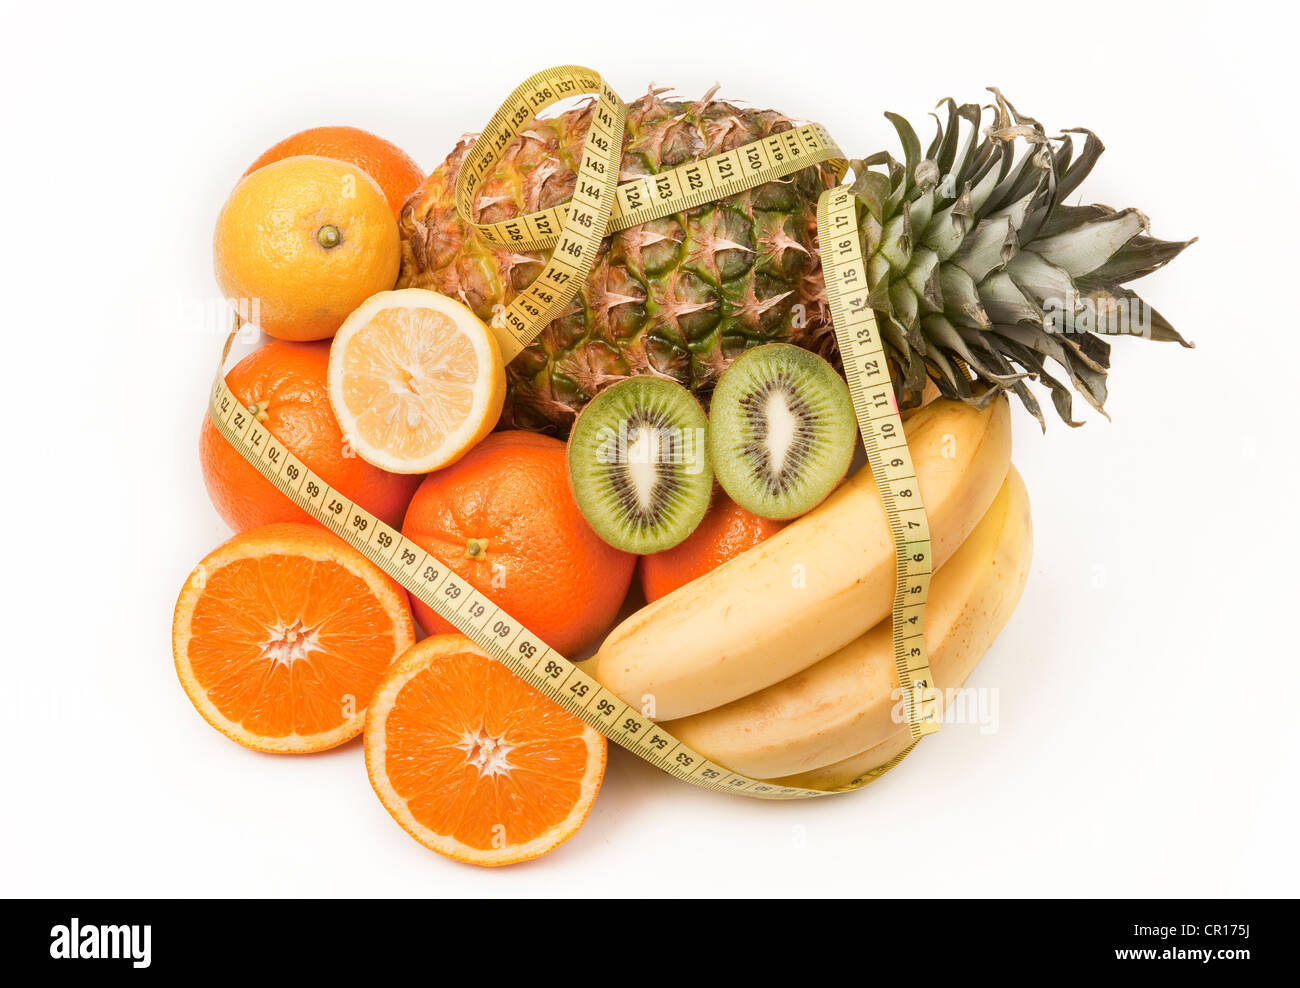 Fruits with a measuring tape, a pineapple, oranges, a lemon, a kiwi fruit and bananas Stock Photo